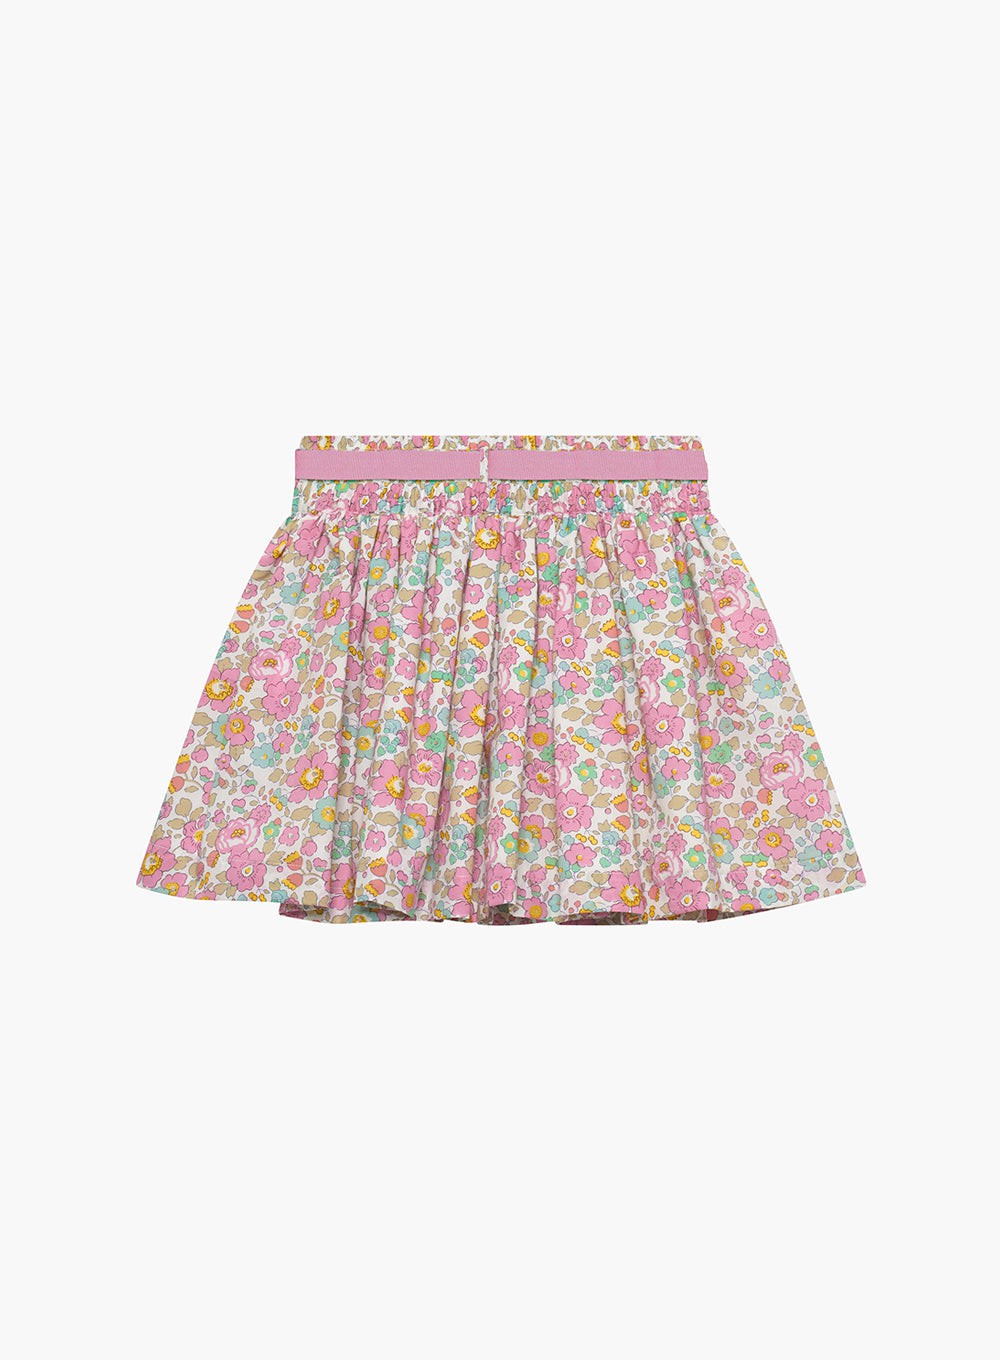 Lily Rose Skirt Ribbon Skirt in Coral Betsy